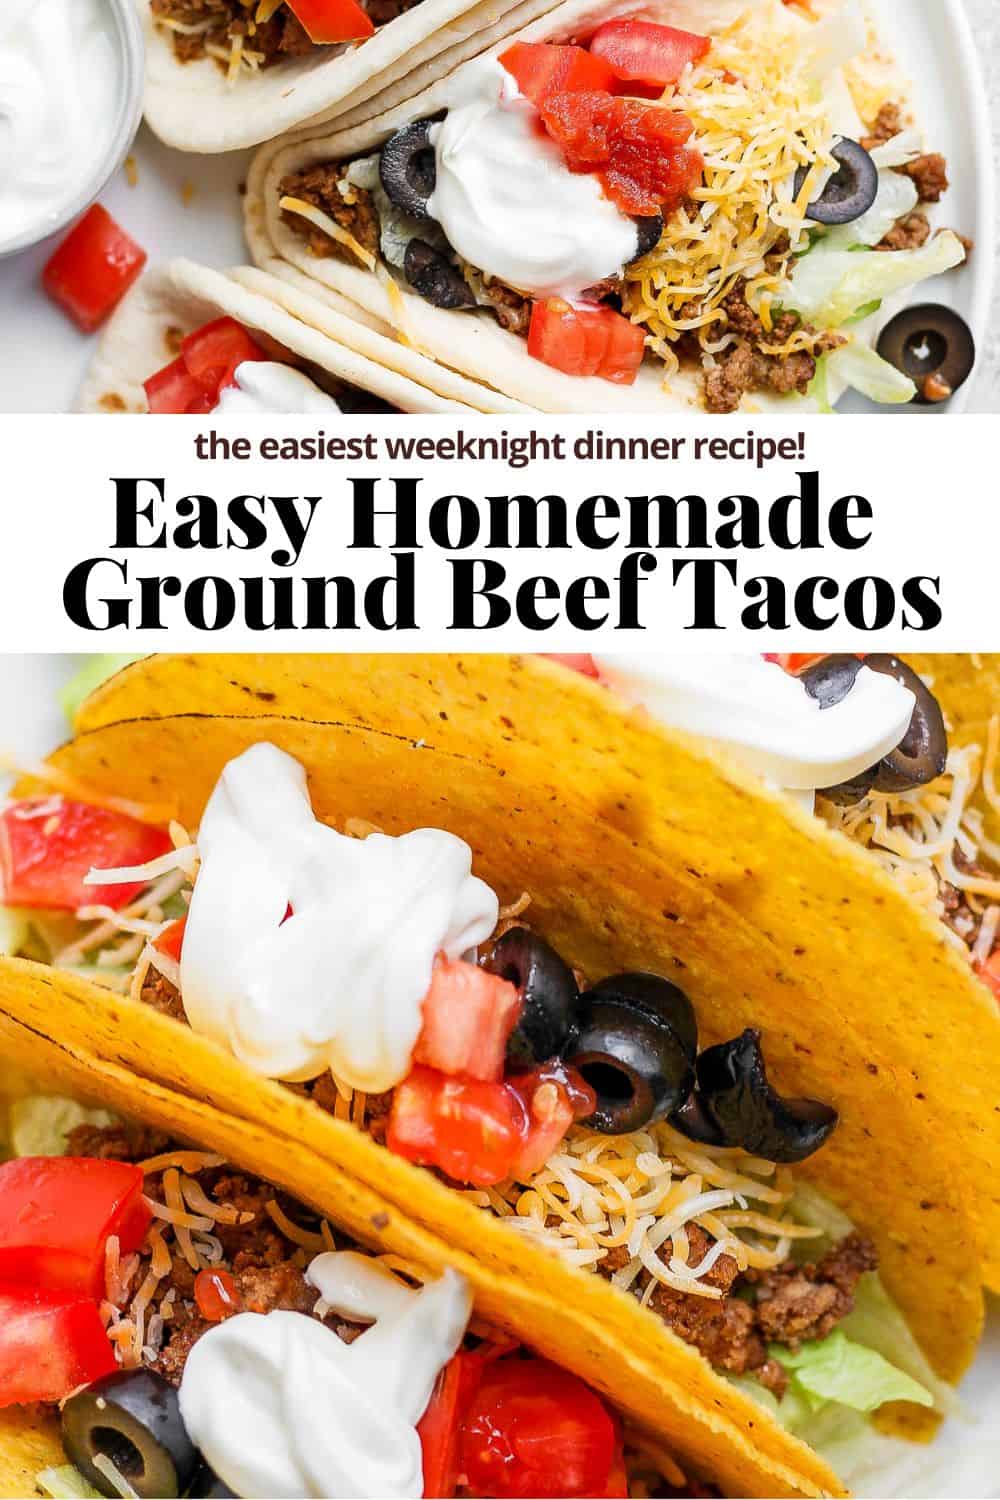 Pinterest image showing a ground beef taco in a soft flour tortilla, the recipe title, and then a ground beef taco made up of a hard taco shell. 